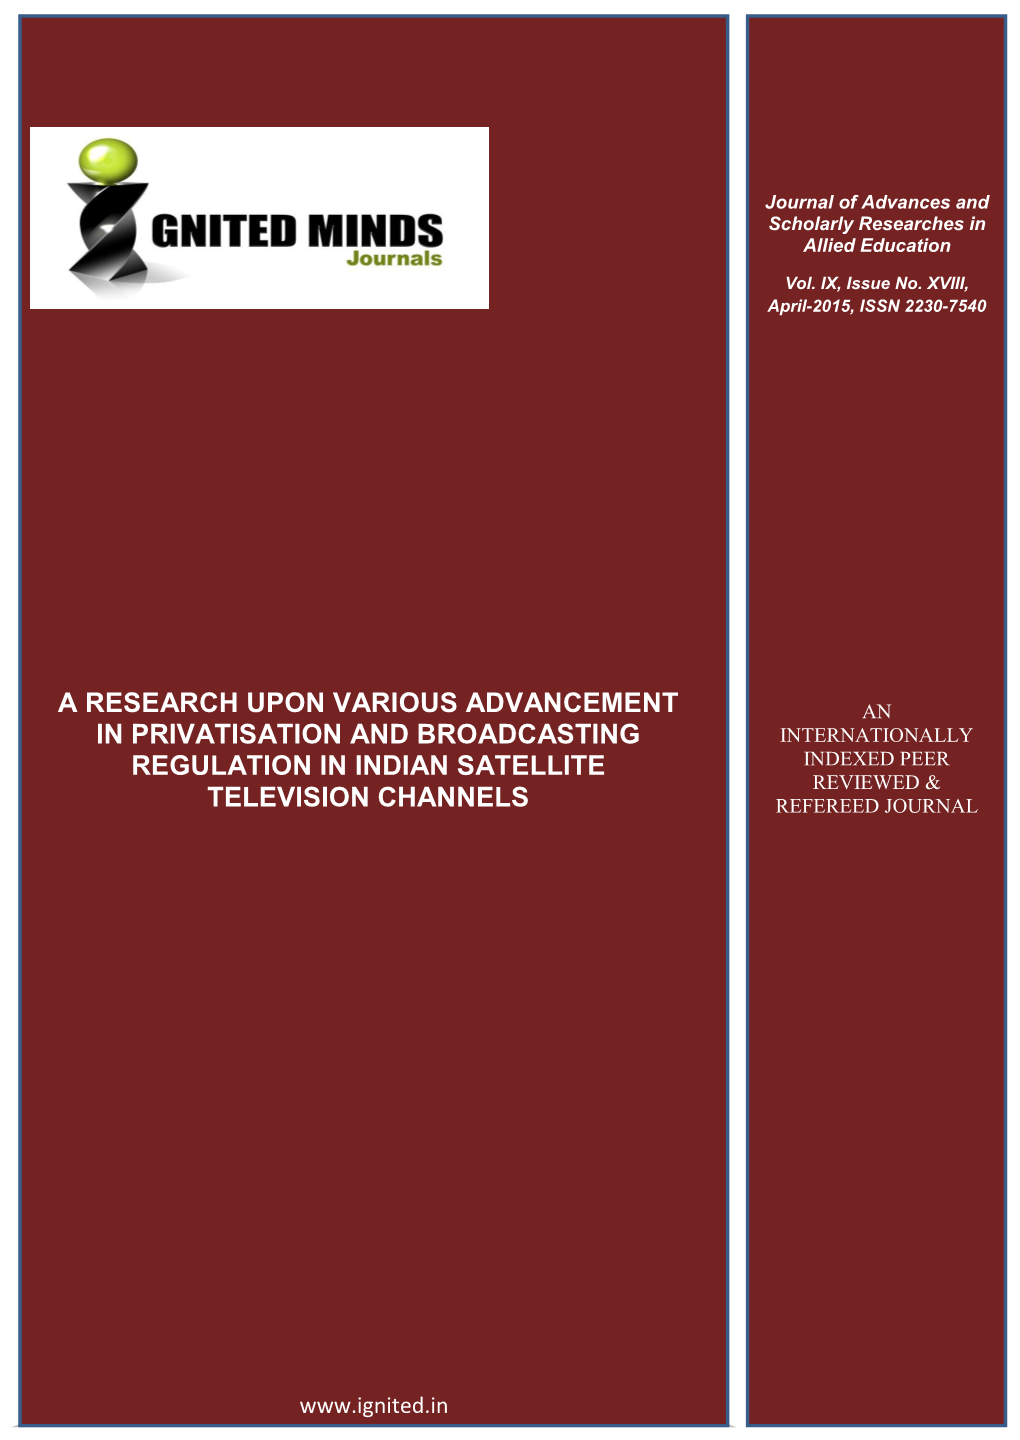 A Research Upon Various Advancement in Privatisation and Broadcasting Regulation in Indian Satellite Television Channels